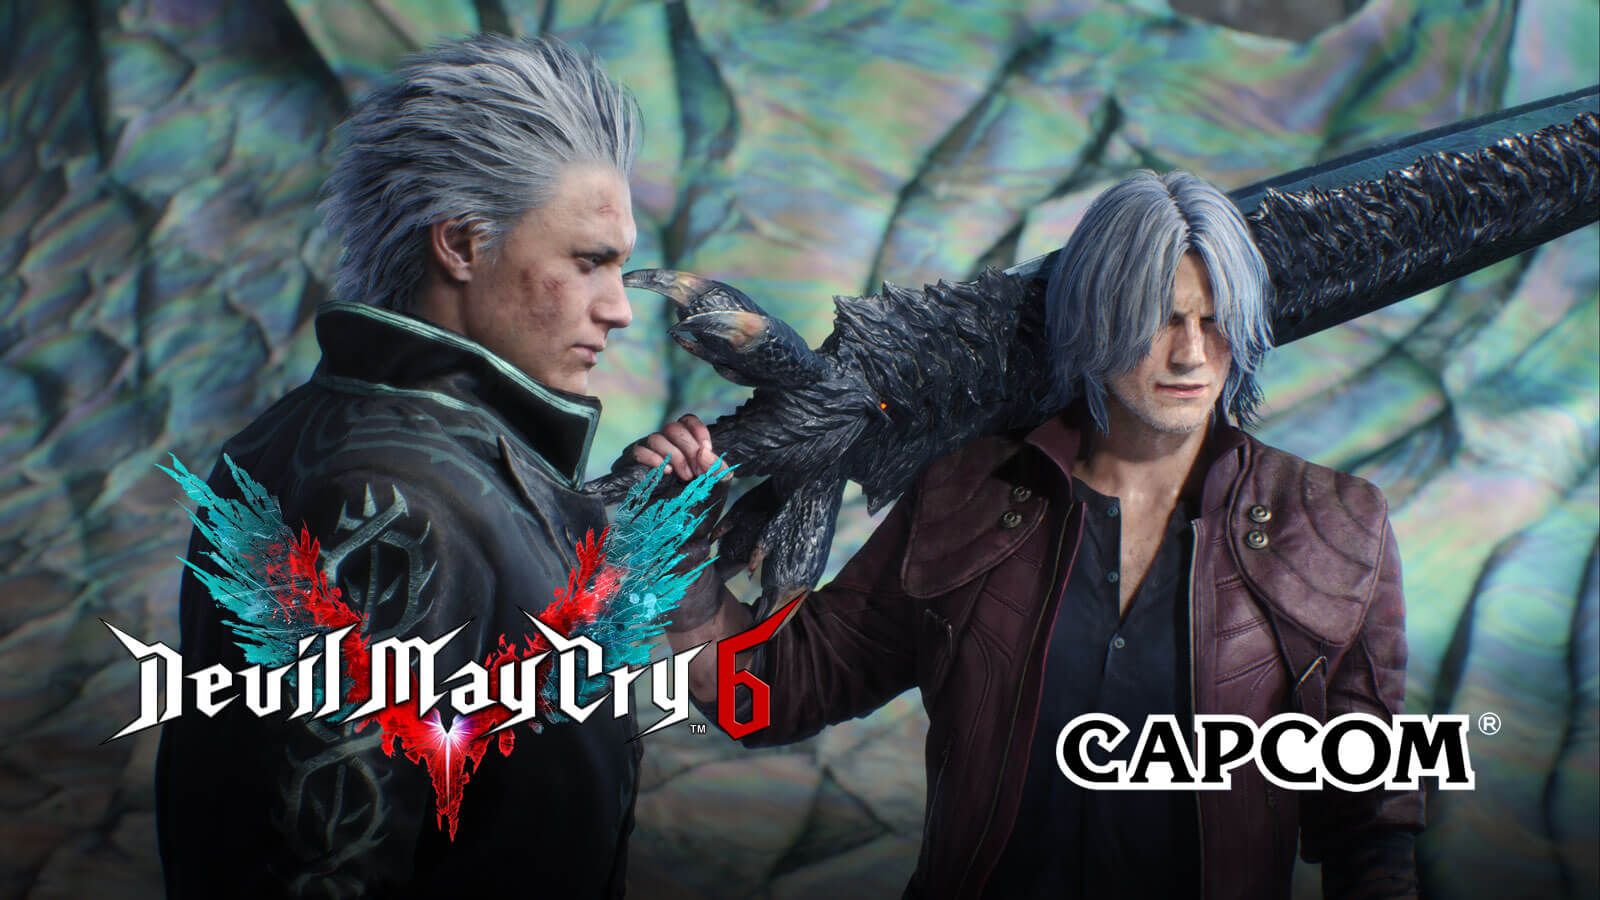 Capcom May Have Teased Devil May Cry 6 